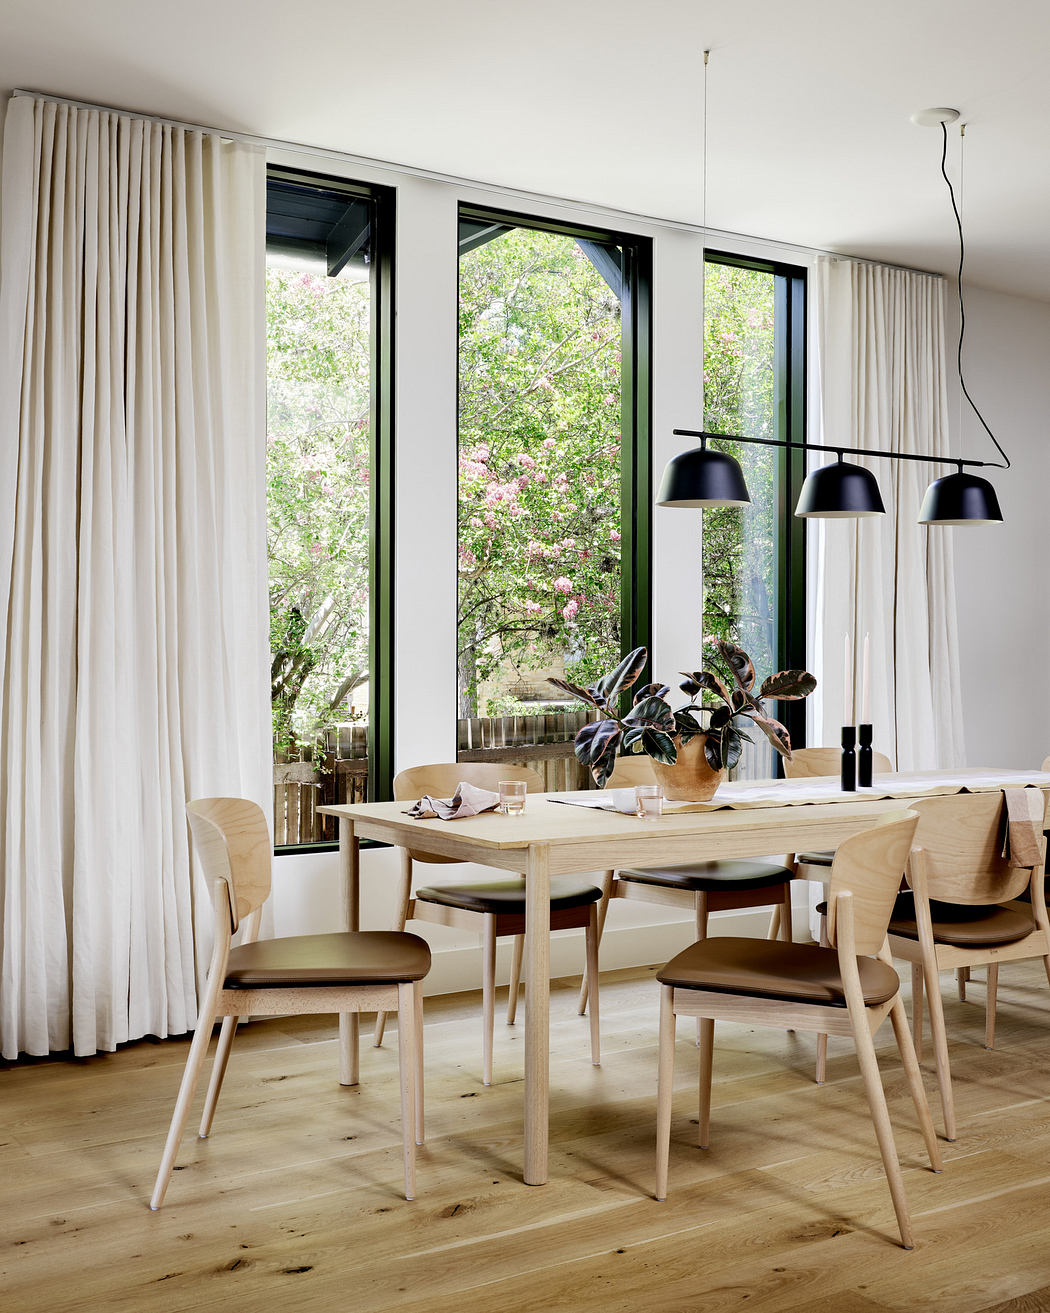 Modern dining room with large windows, wooden table, chairs, and pendant lights.